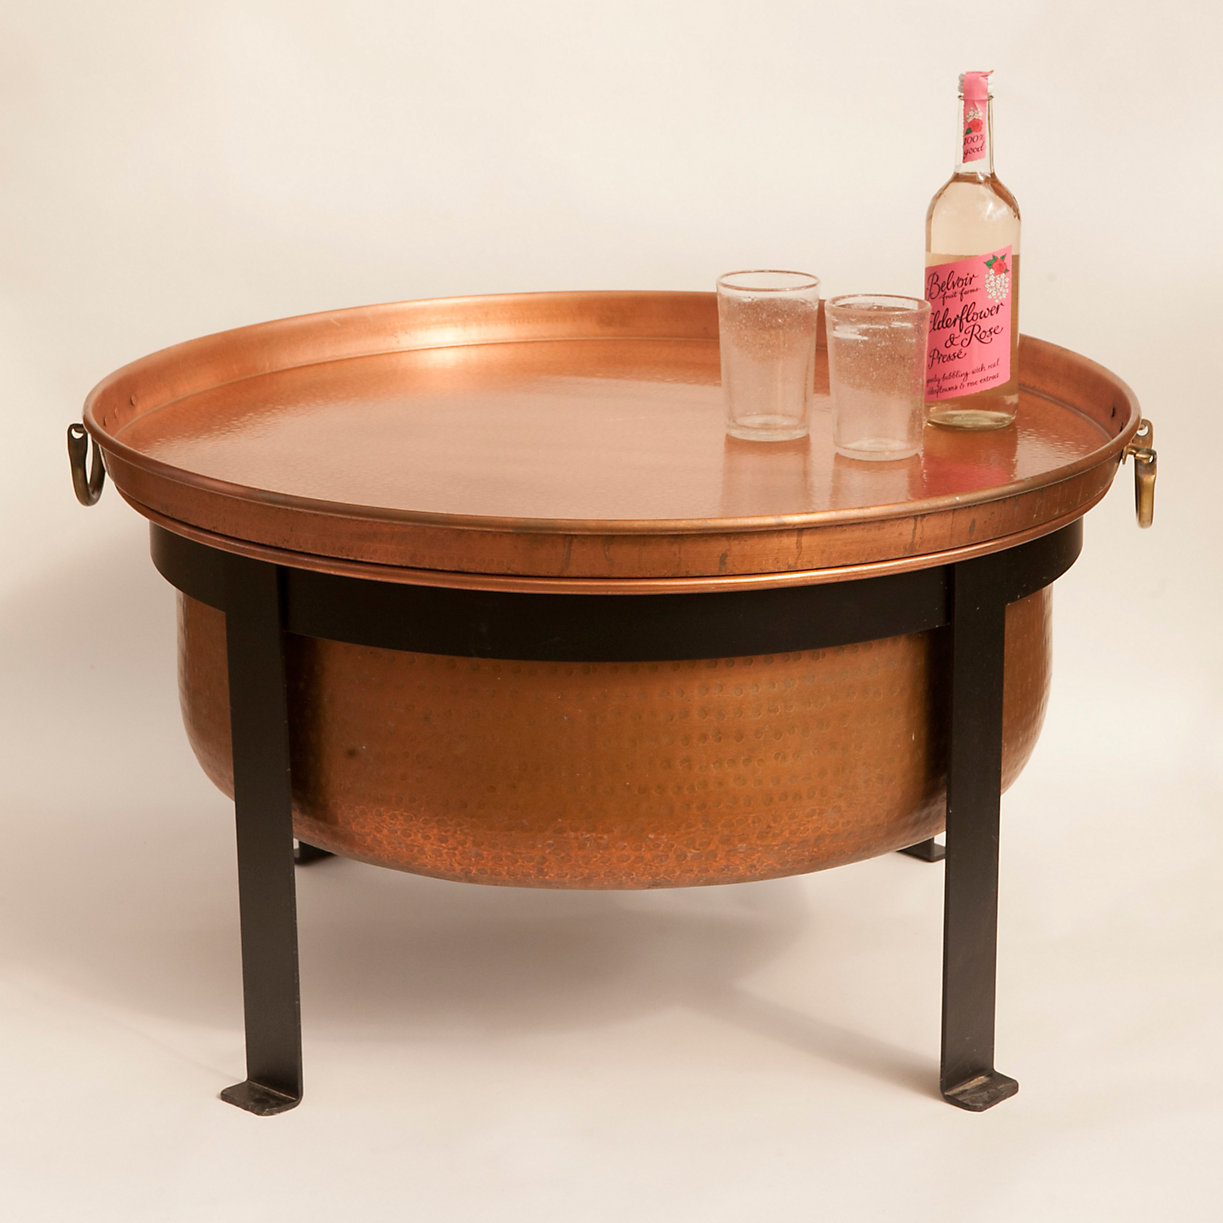 Copper Table Fire Pit Terrain, Solid Hammered Copper Fire Pit With Lid Converts To Table